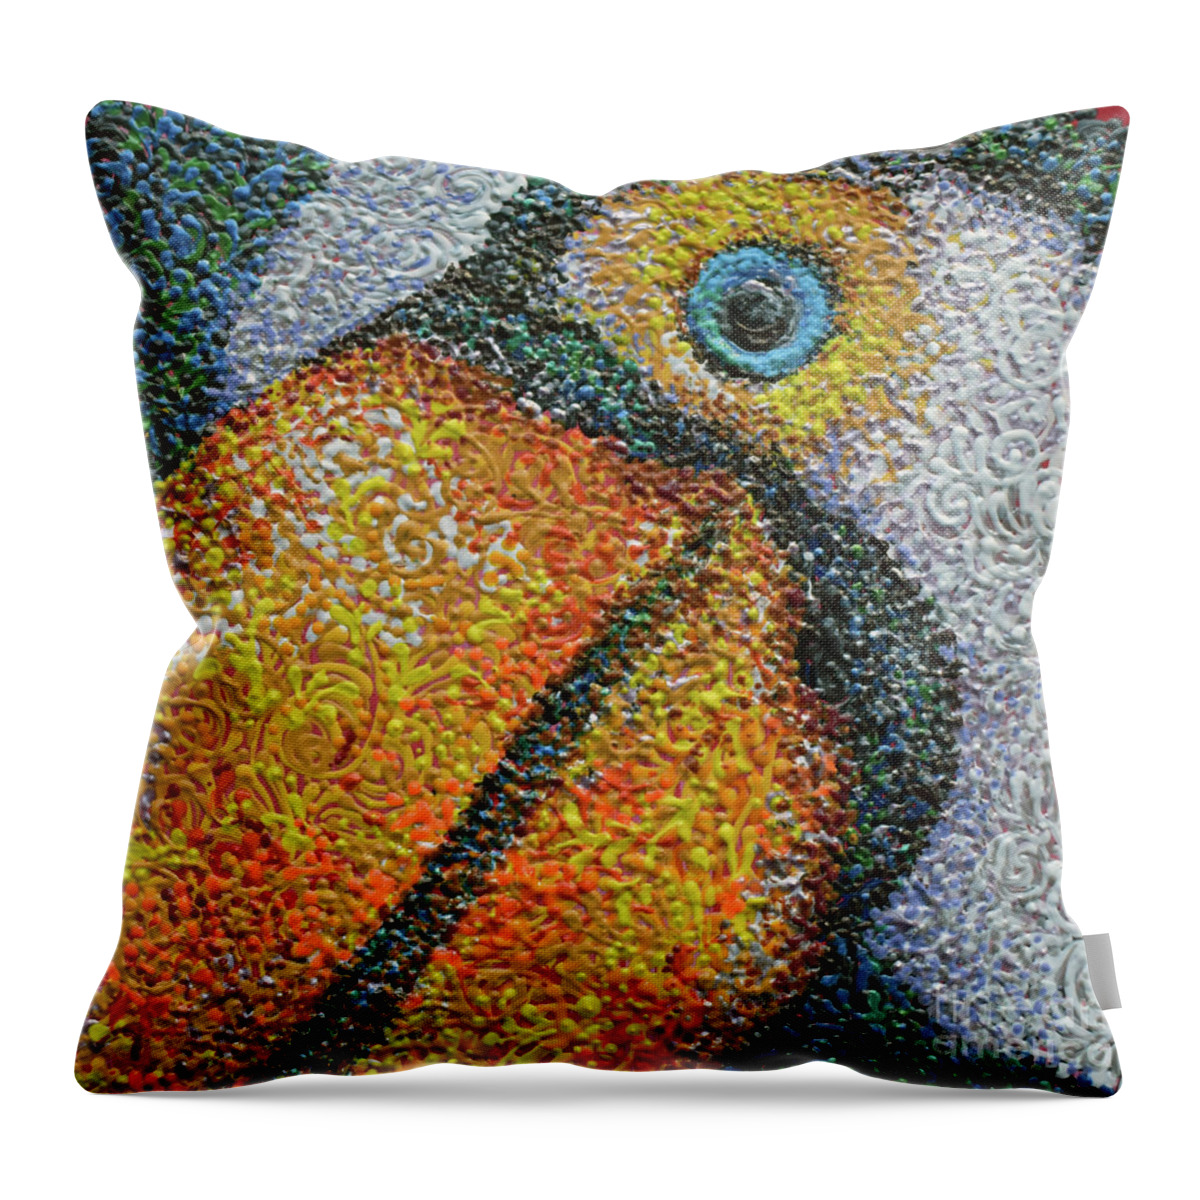 Rainforest Resident Throw Pillow featuring the painting Rainforest Resident by Cheryle Gannaway